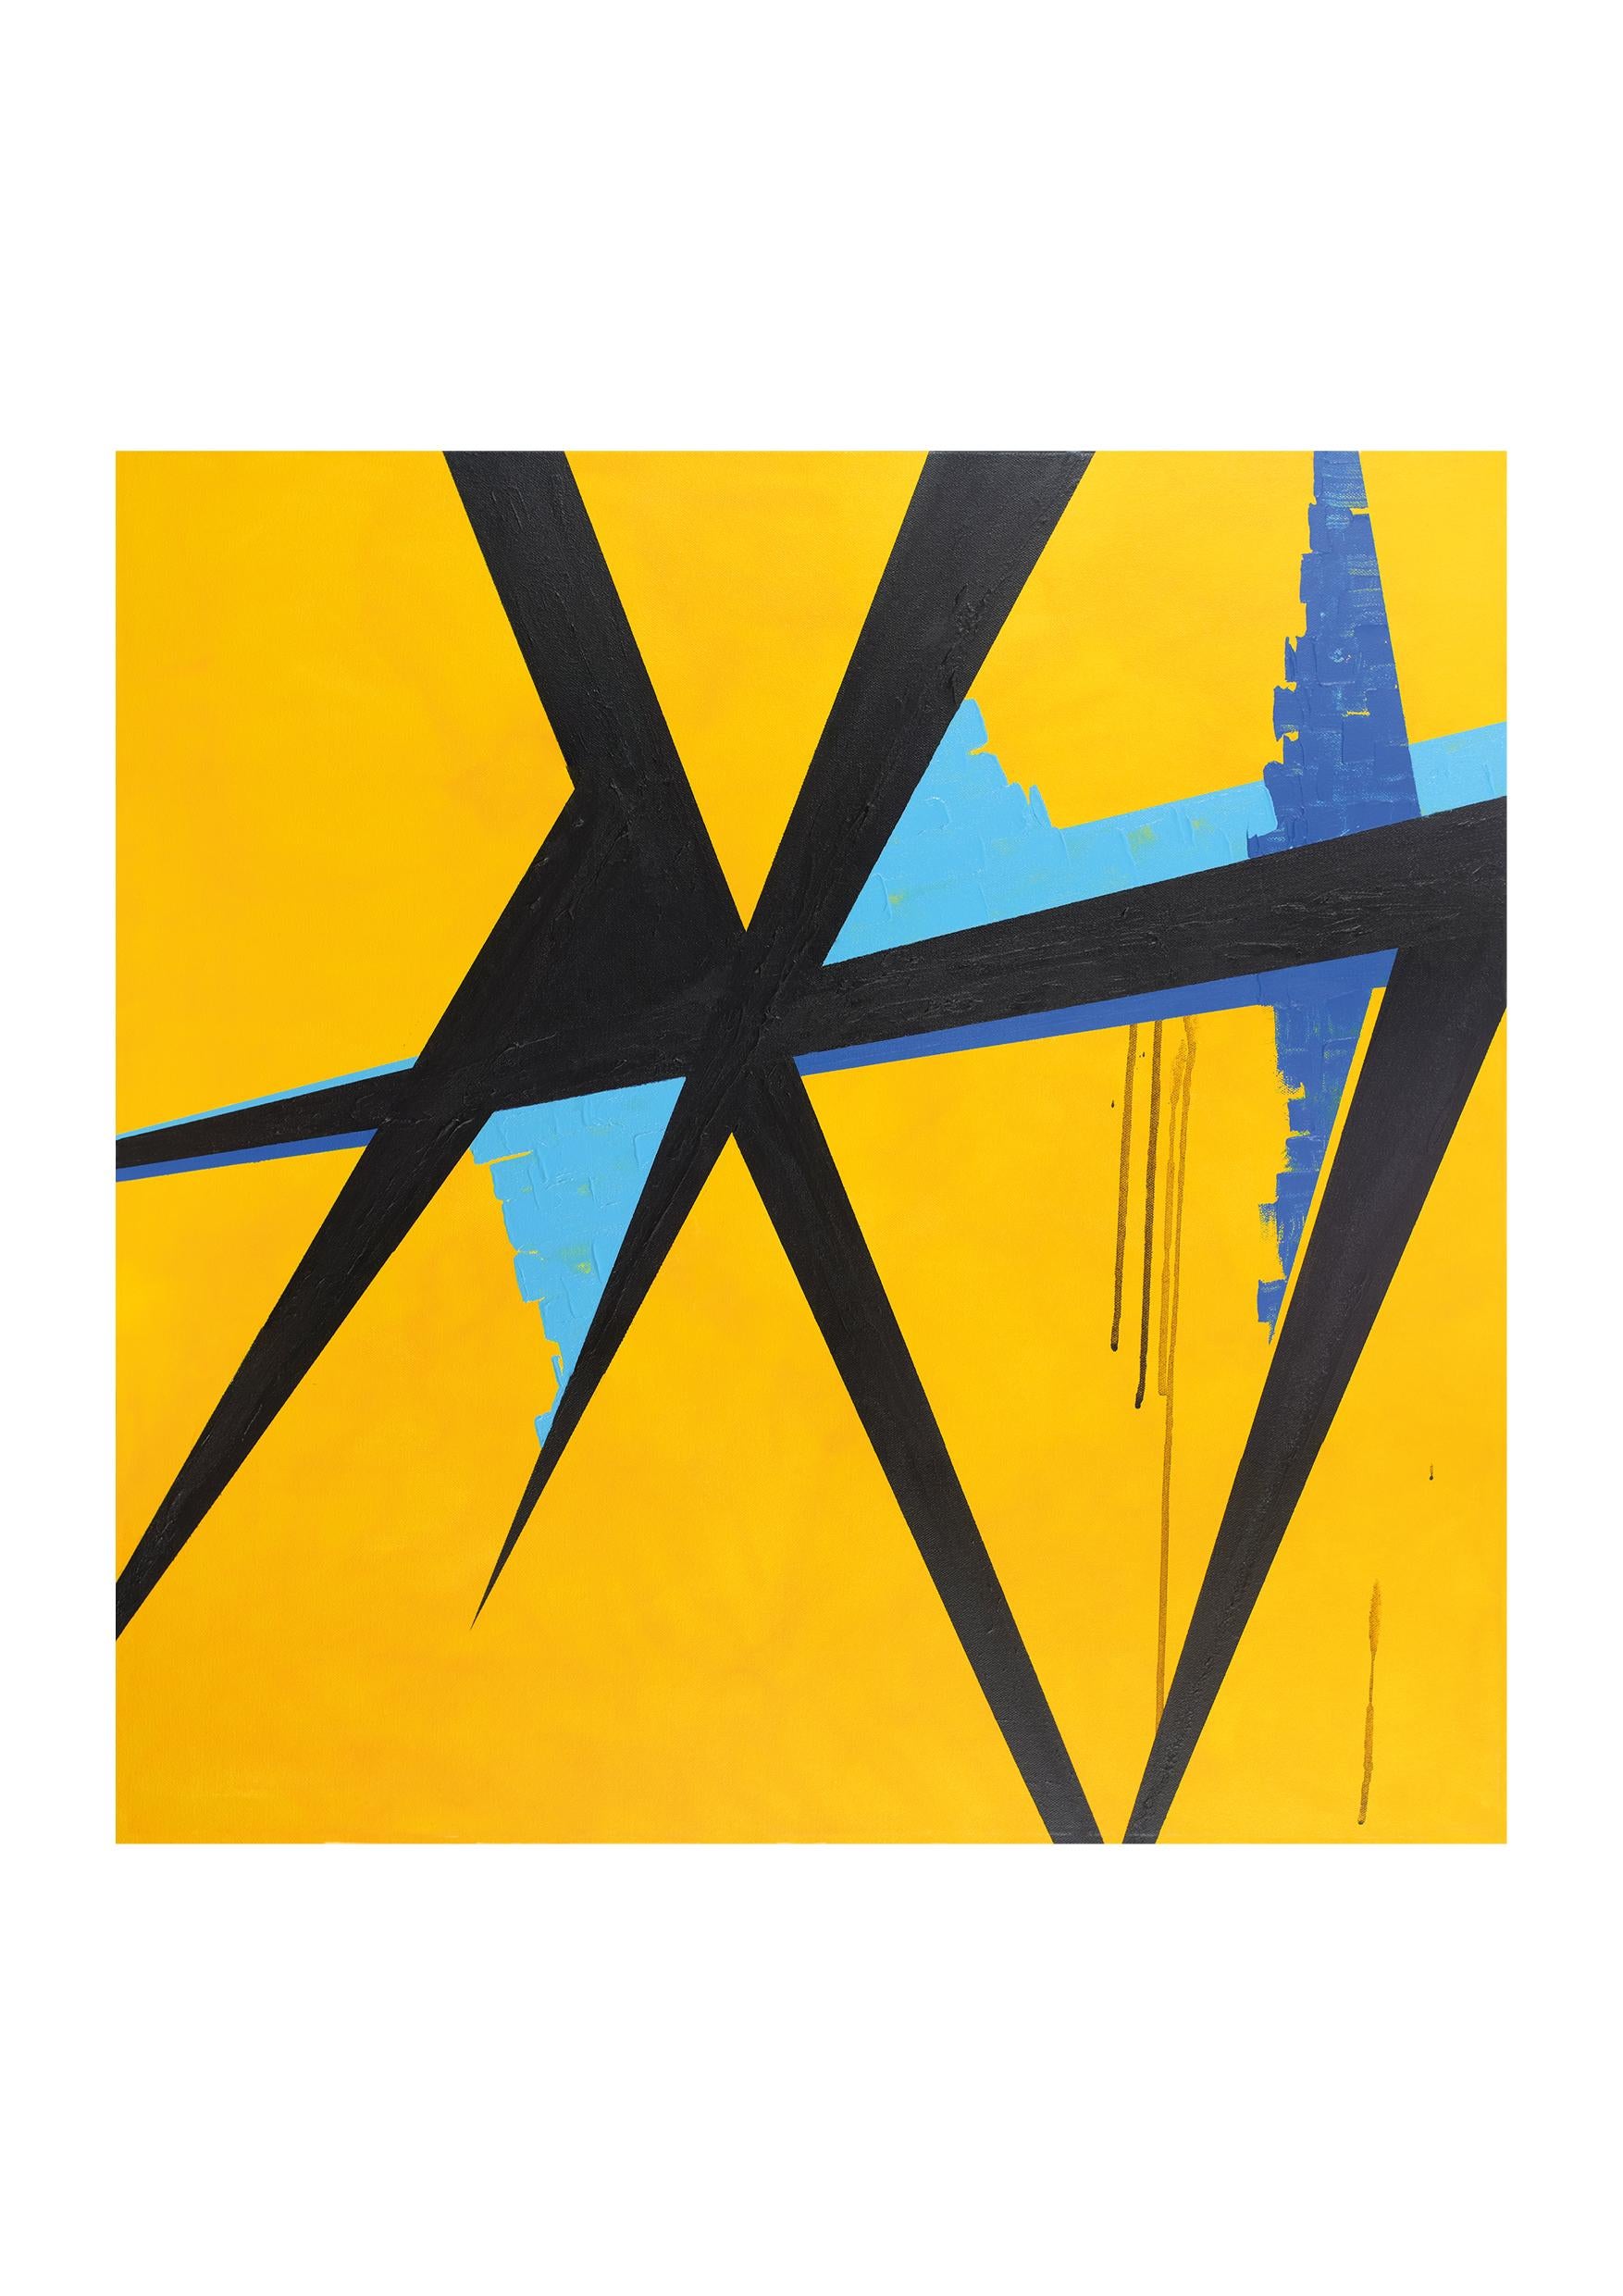 Yallop's style combines colour and bold marks with his love of travelling the world. His work is based on places he has visited or abstract views of the world around him to create paintings that capture the feeling of a place. Charlie lives and